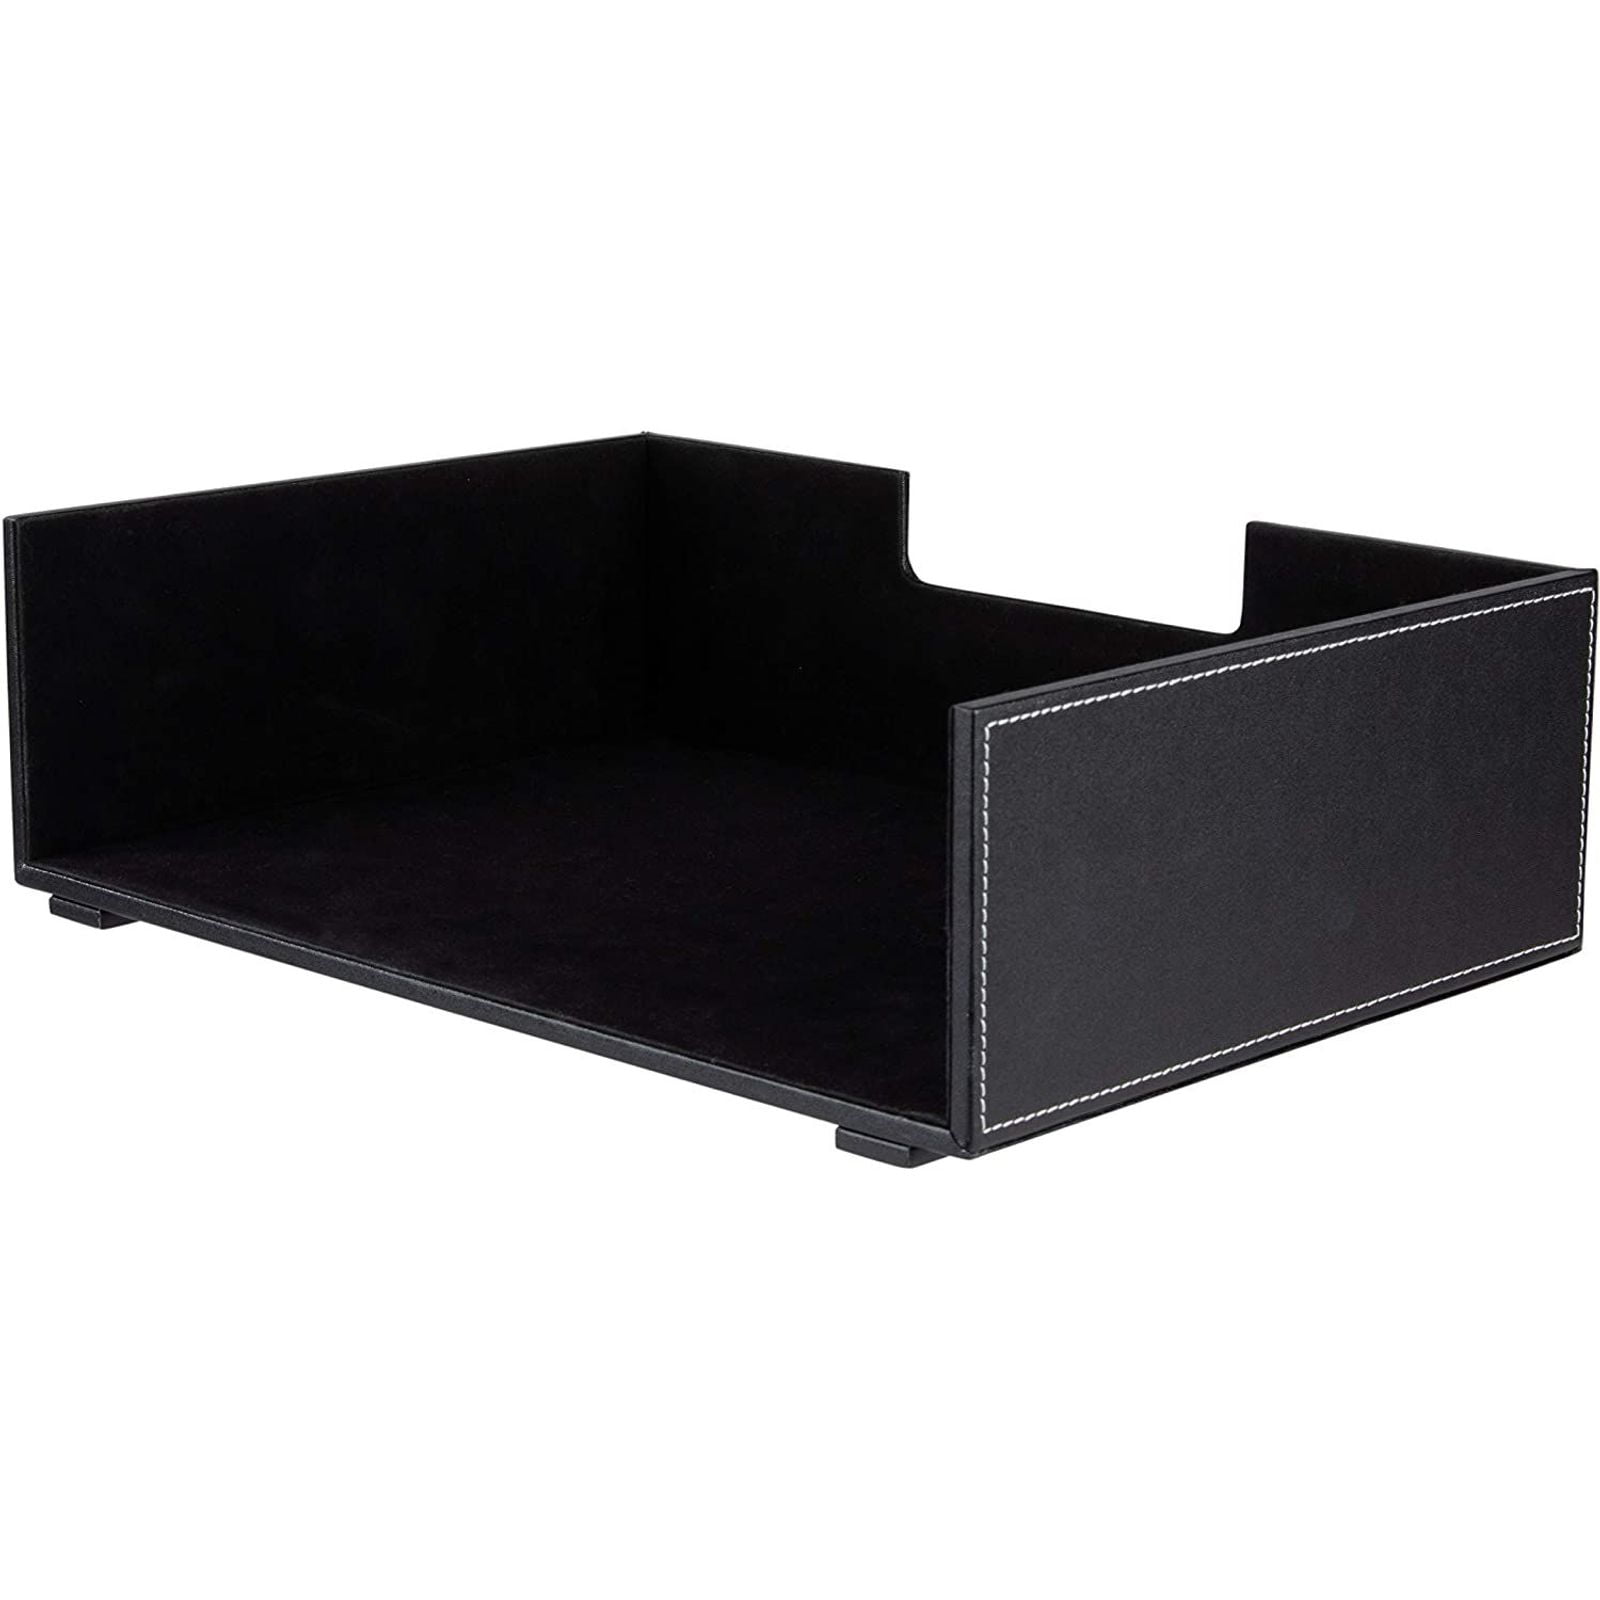 Pu Leather Paper Tray 13 X 4 9, Leather Paper Tray